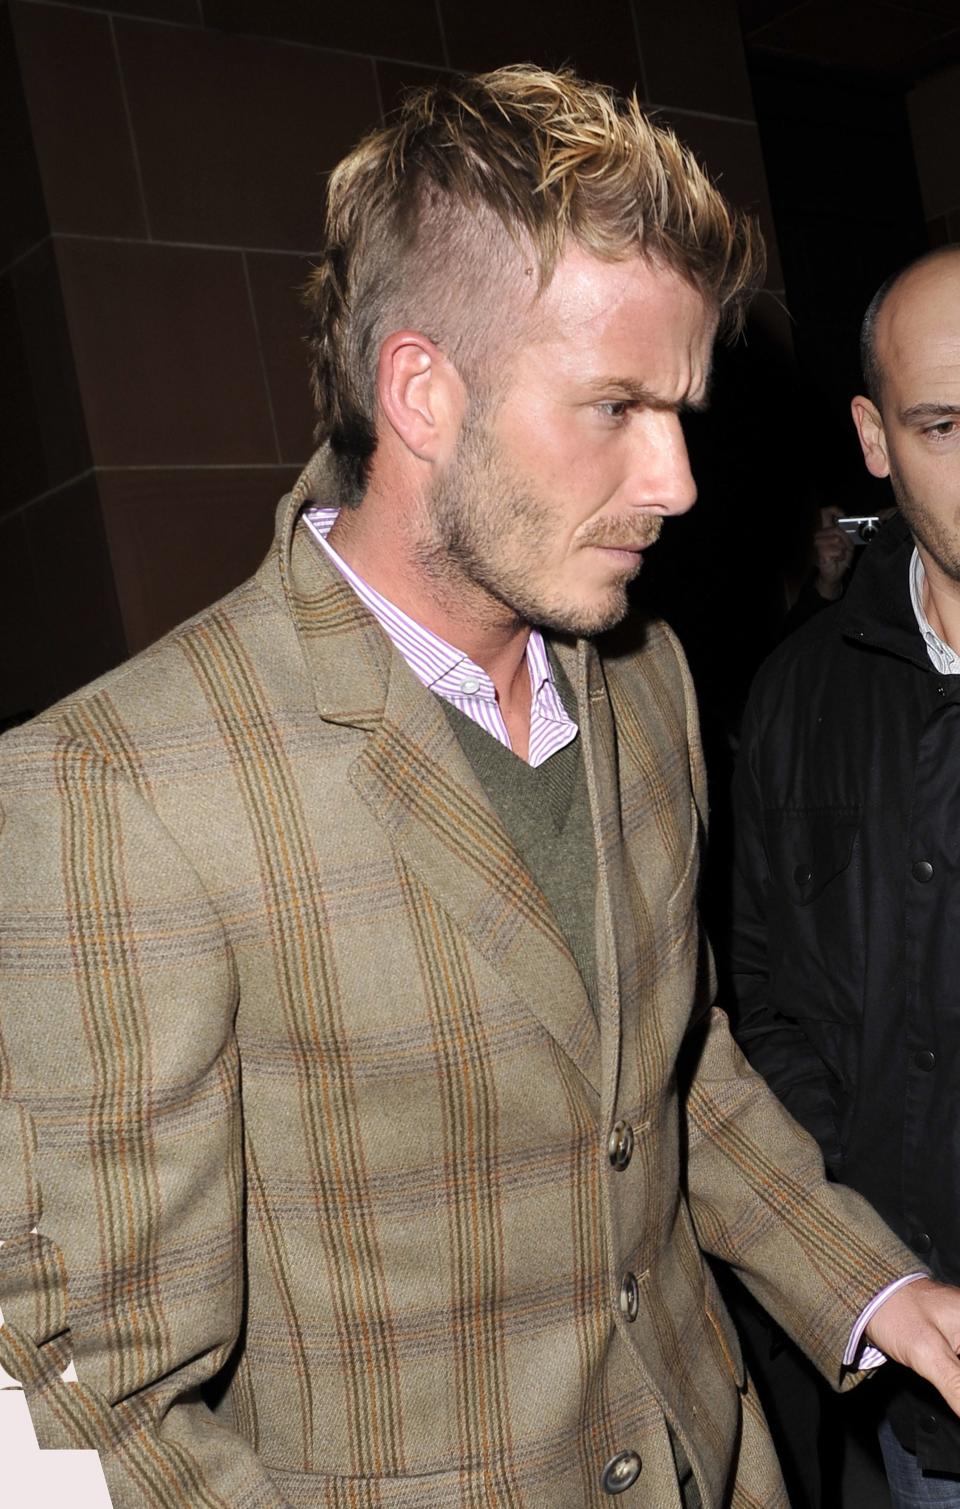 <h1 class="title">US ONLY DAVID BECKHAM LEAVING CIPRIANI IN LONDON</h1><cite class="credit">Philip Ramey Photography, LLC</cite>